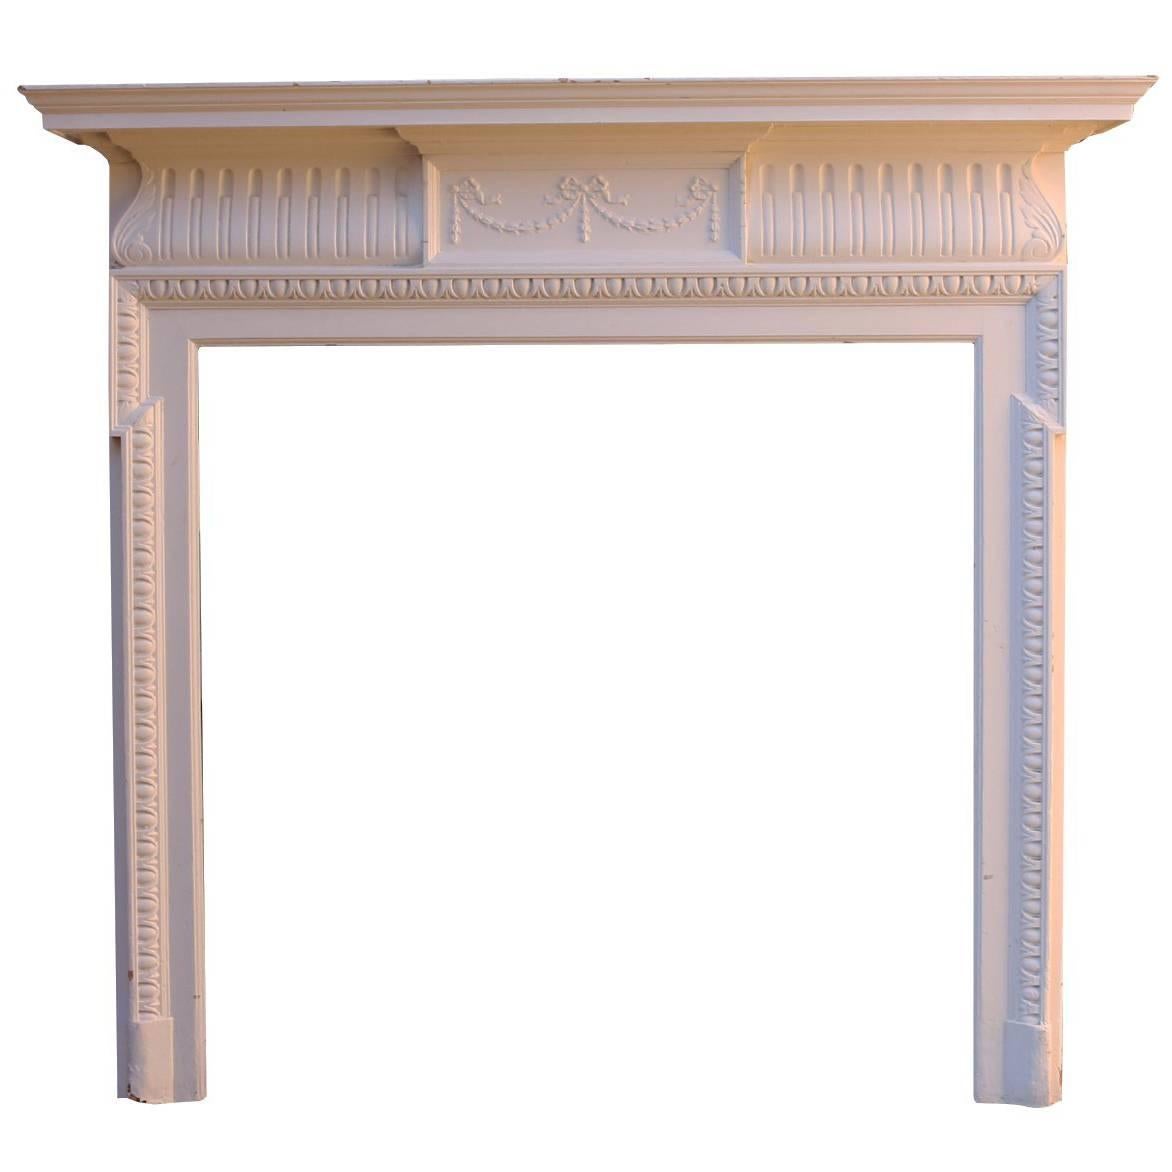 Late 19th Century Painted Pine and Composition Fire Surround